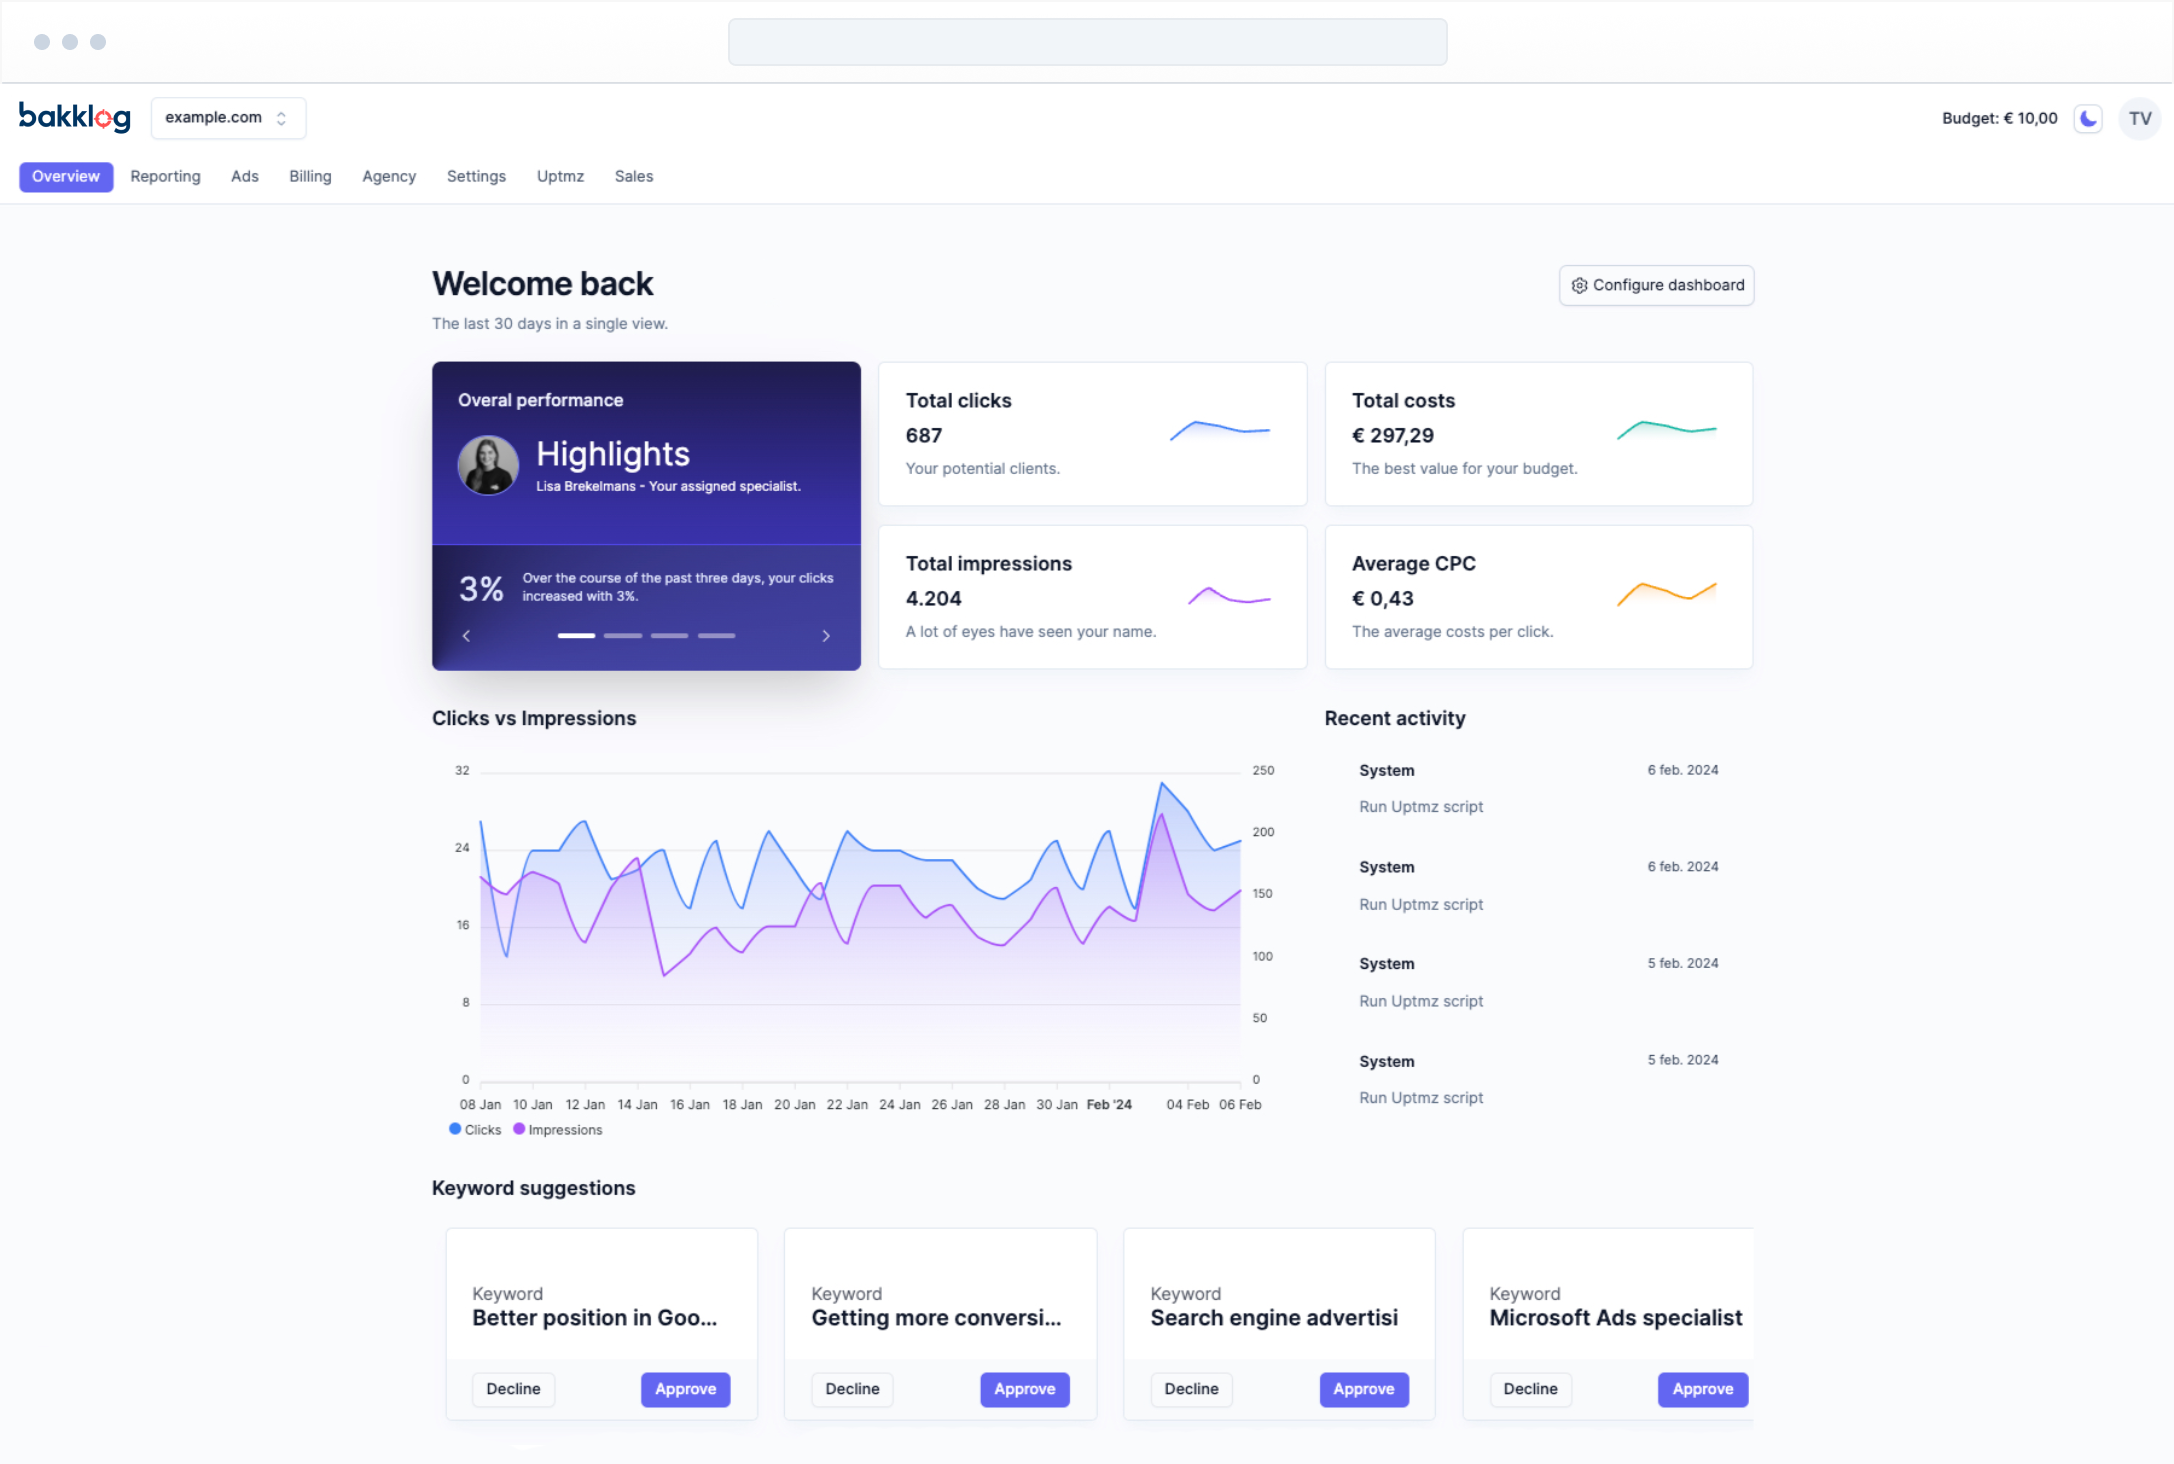 LaunchPad Google Ads dashboard screenshot - easy and intuitive overview of your Google Ads campaigns